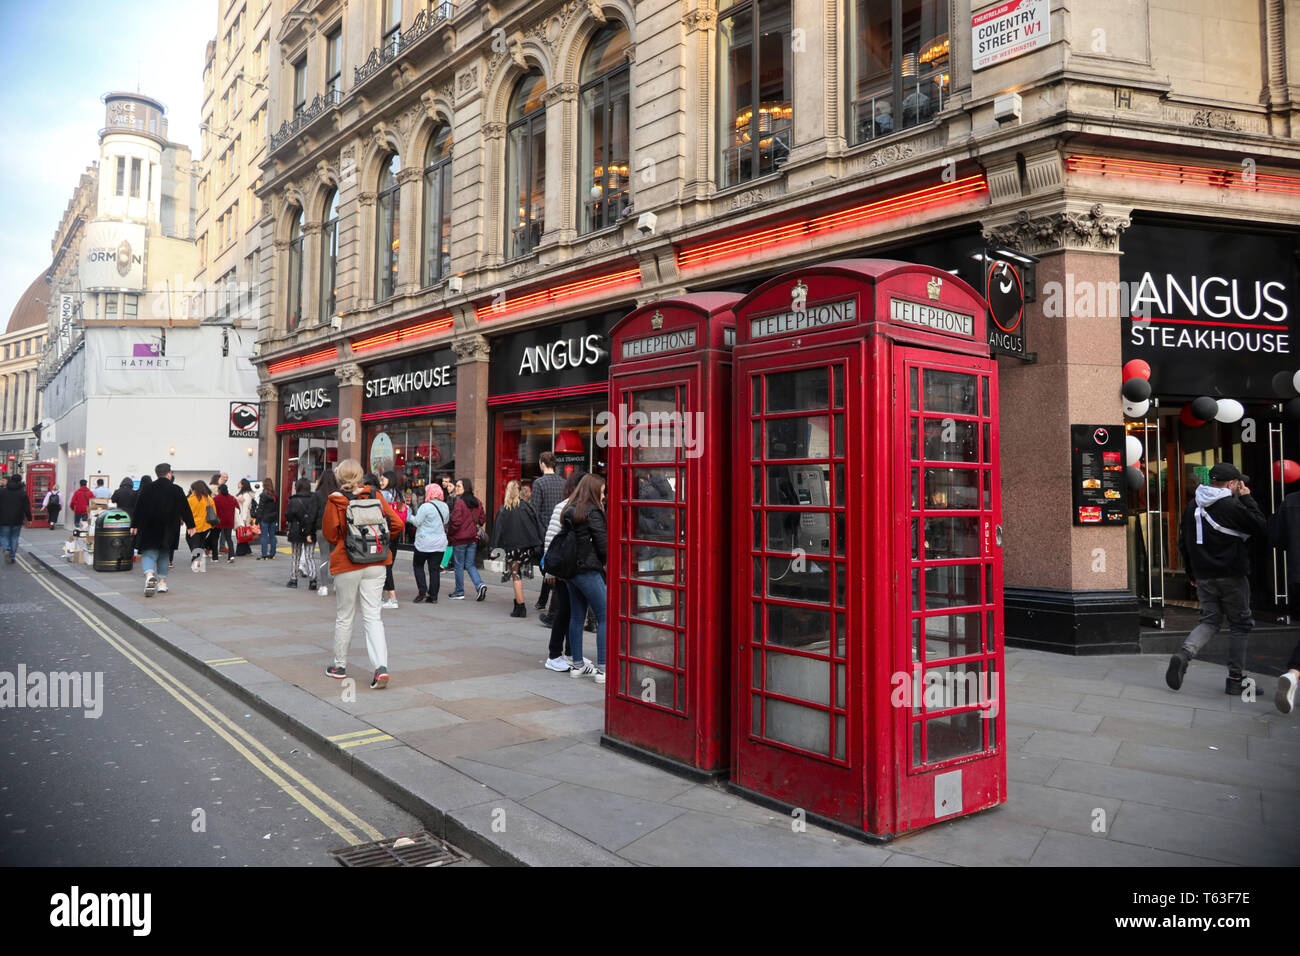 Traditional British Red Telephone Boxes by Angus Steakhouse,  Westend, London, England, UK Stock Photo